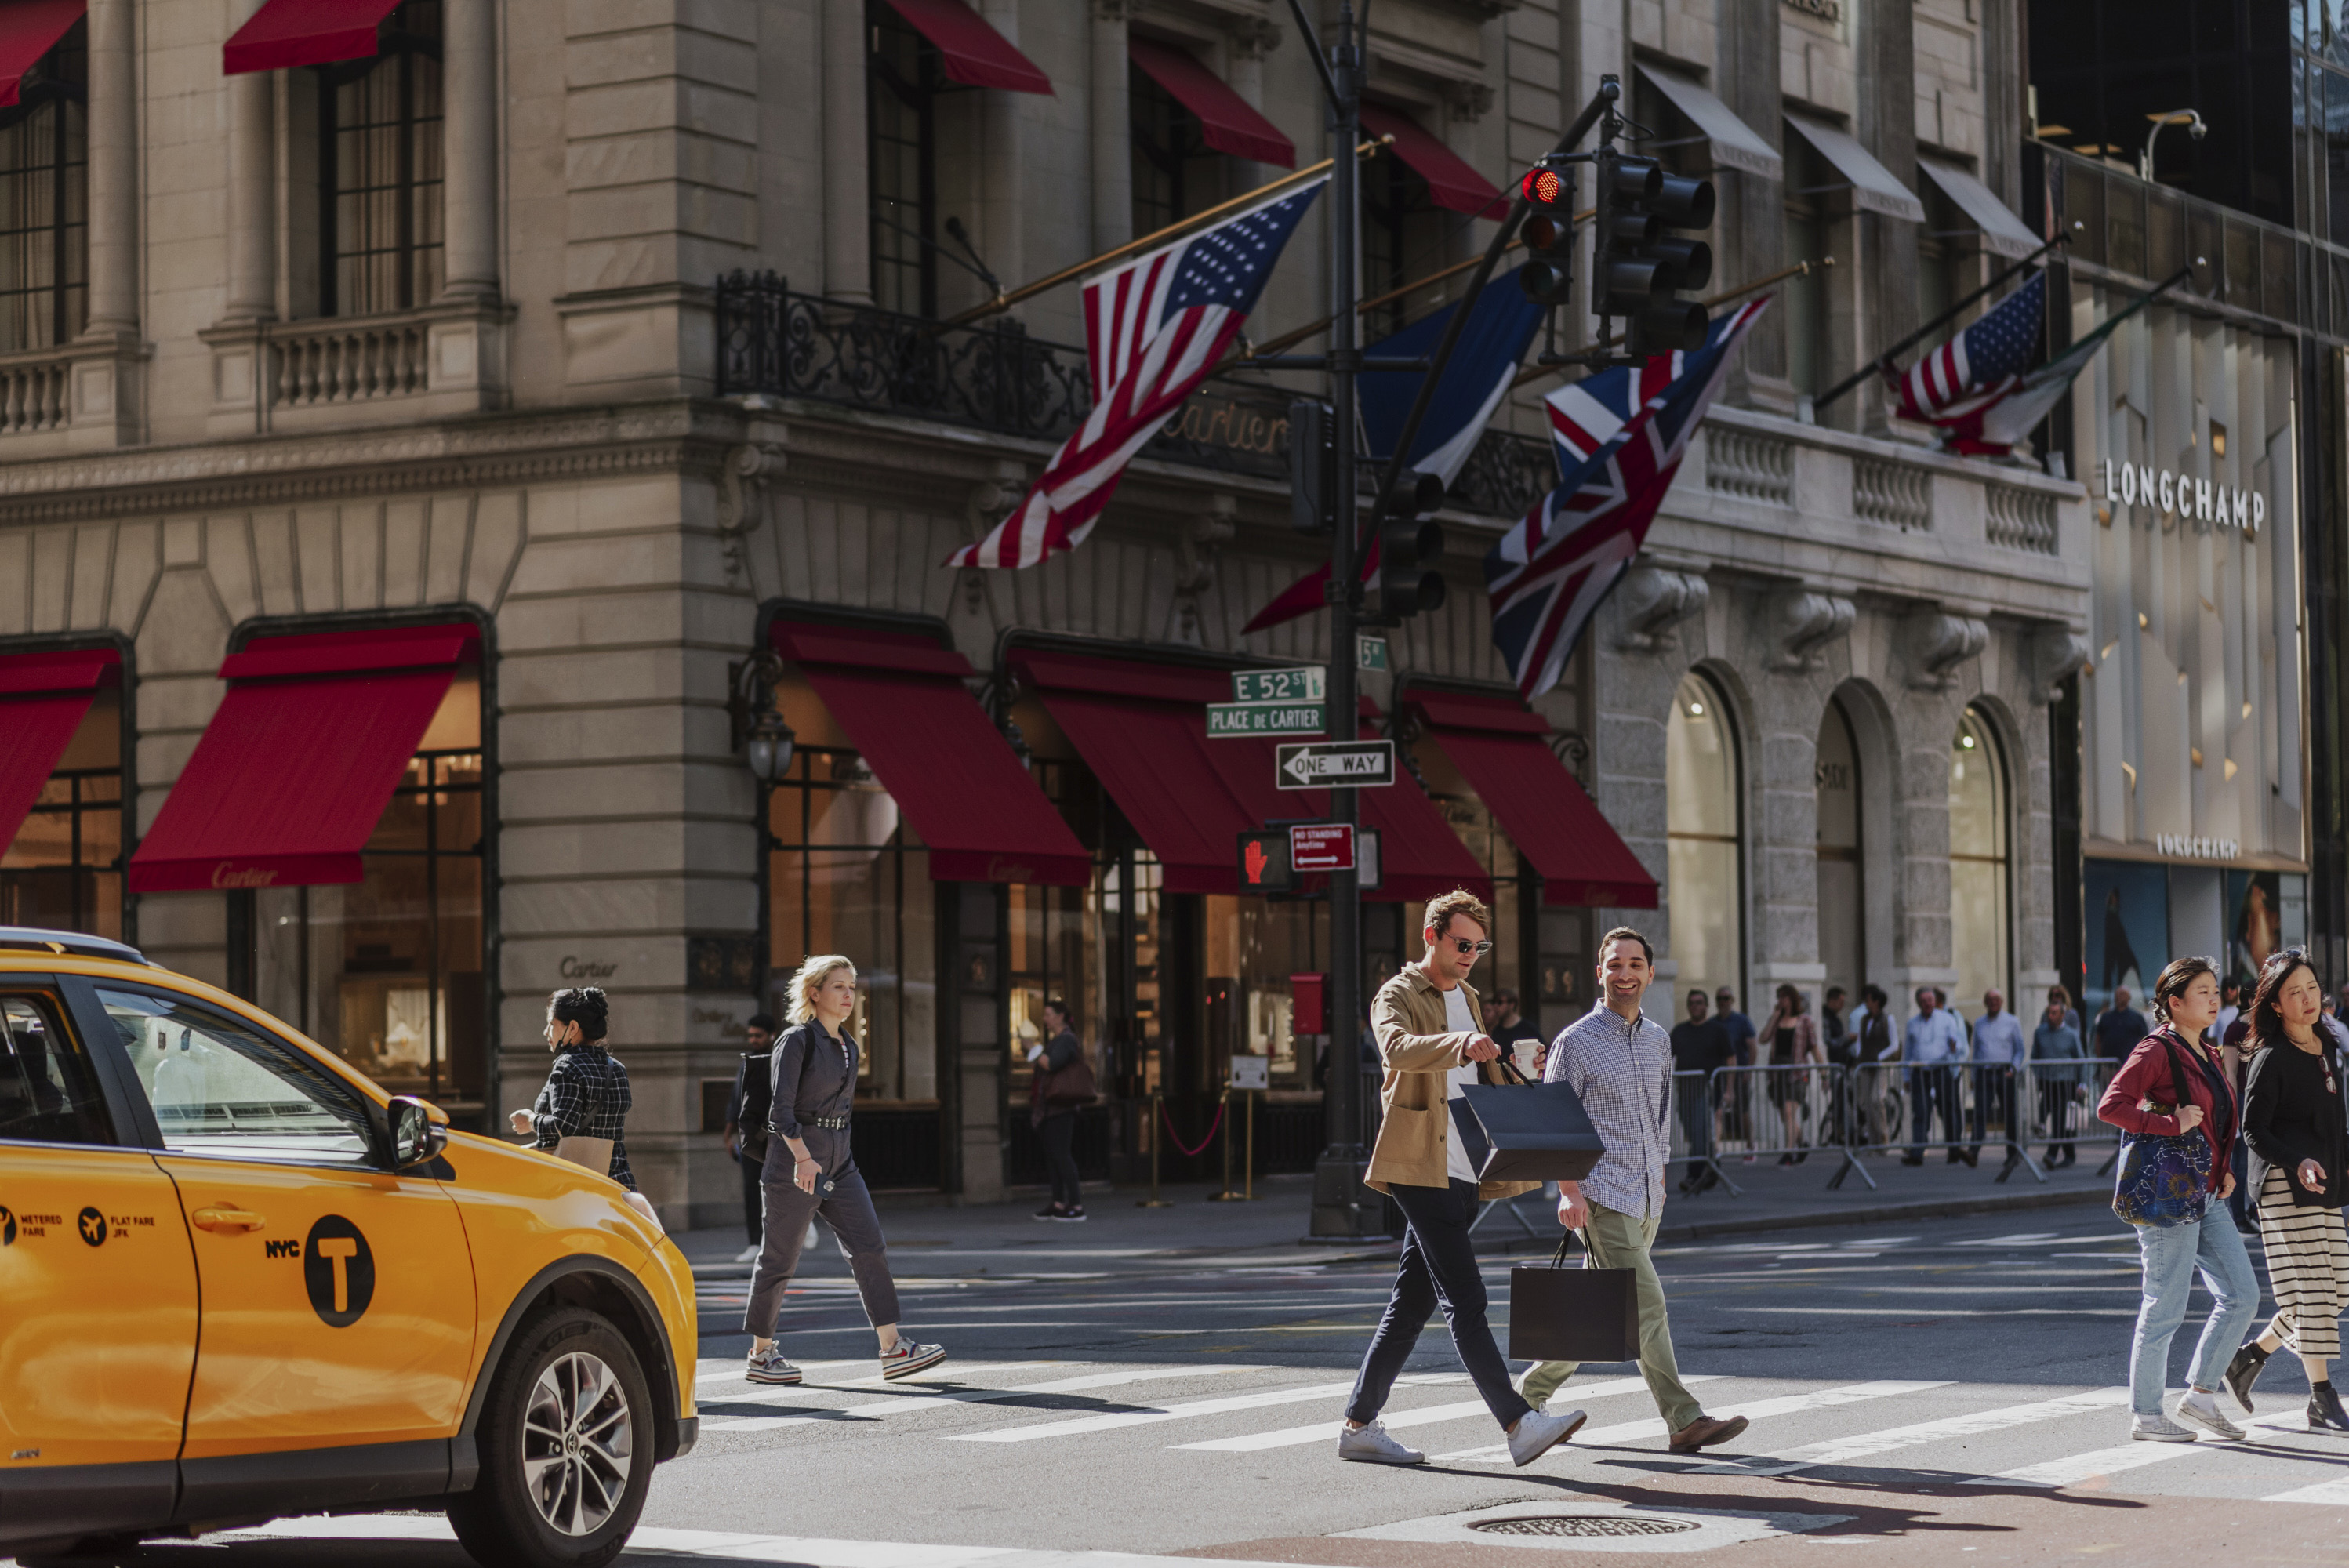 The Ultimate Guide to Shopping in New York City